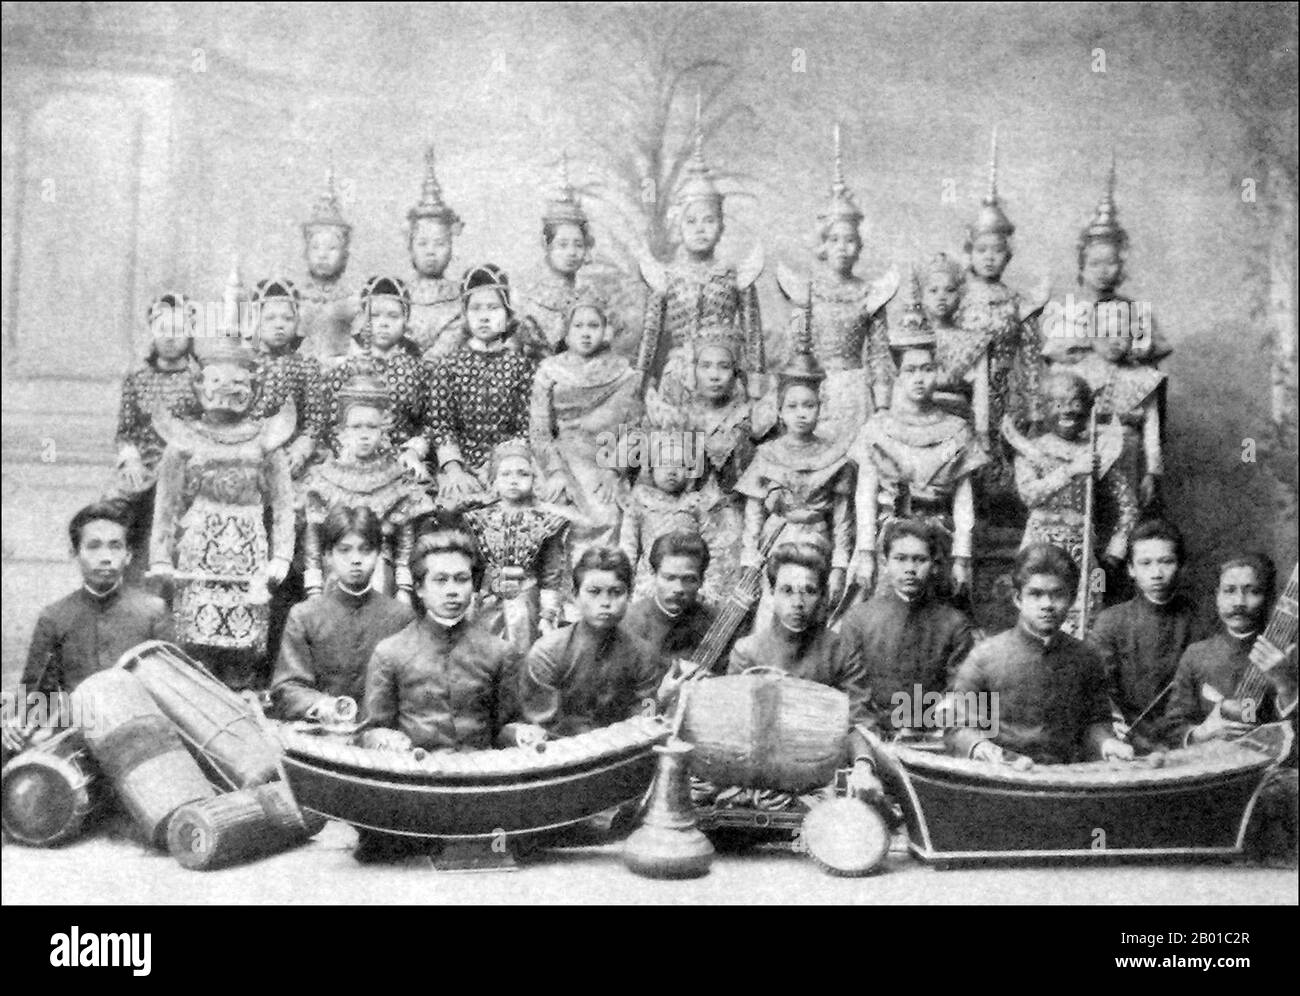 Thailand: An orchestra at the Siamese Court, Bangkok, prior to their departure to Berlin, c. 1900.  Thai classical music is synonymous with those stylised court ensembles and repertoires that emerged in its present form within the royal centers of Central Thailand some 800 years ago. These ensembles, while being deeply influenced by Khmer and even older practices and repertoires from India, are today uniquely Thai expressions. Stock Photo